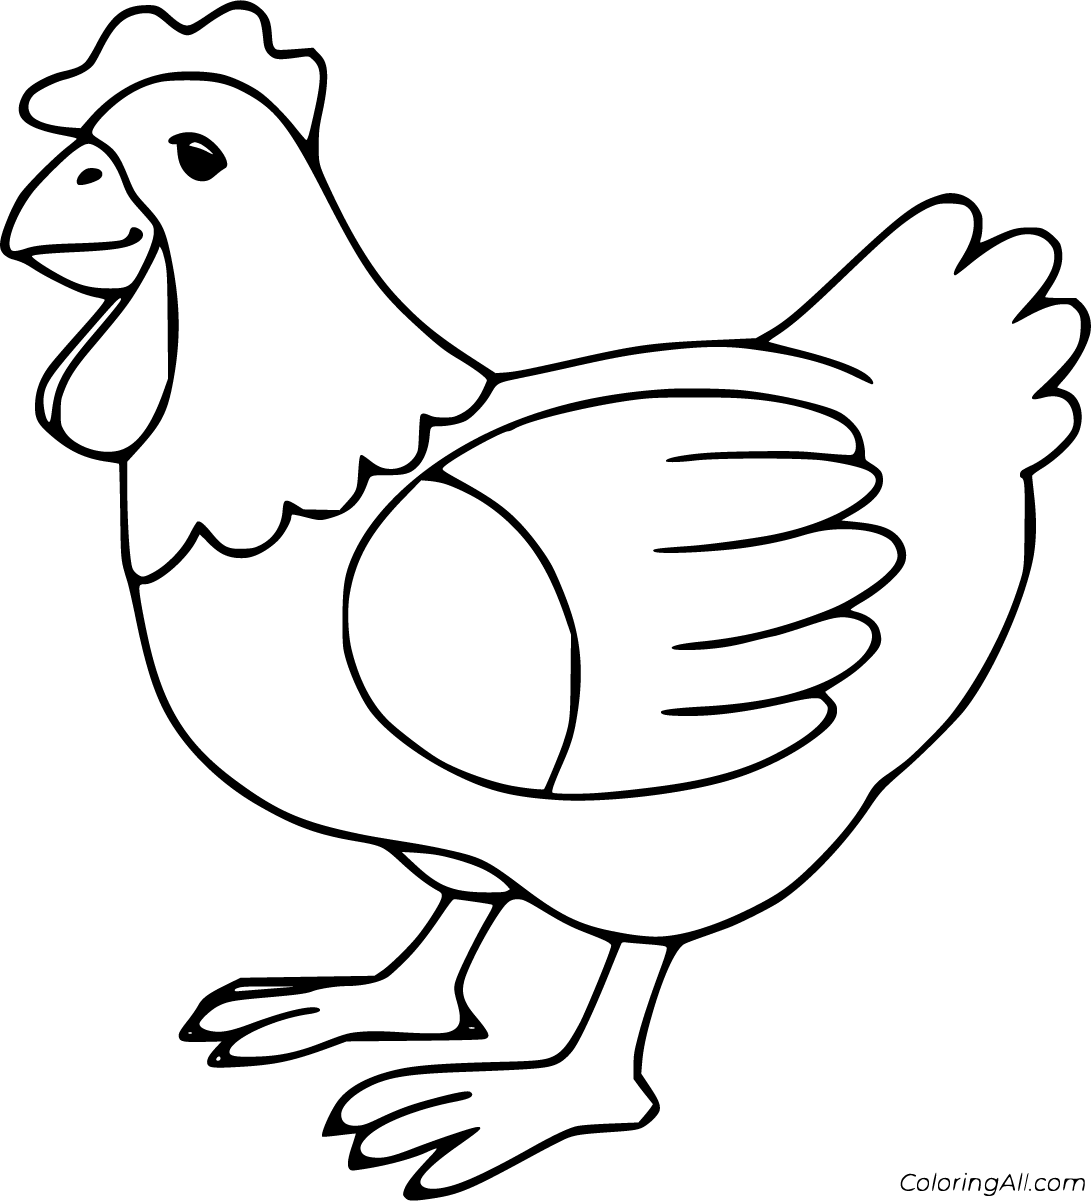 Chicken Coloring Pages - ColoringAll